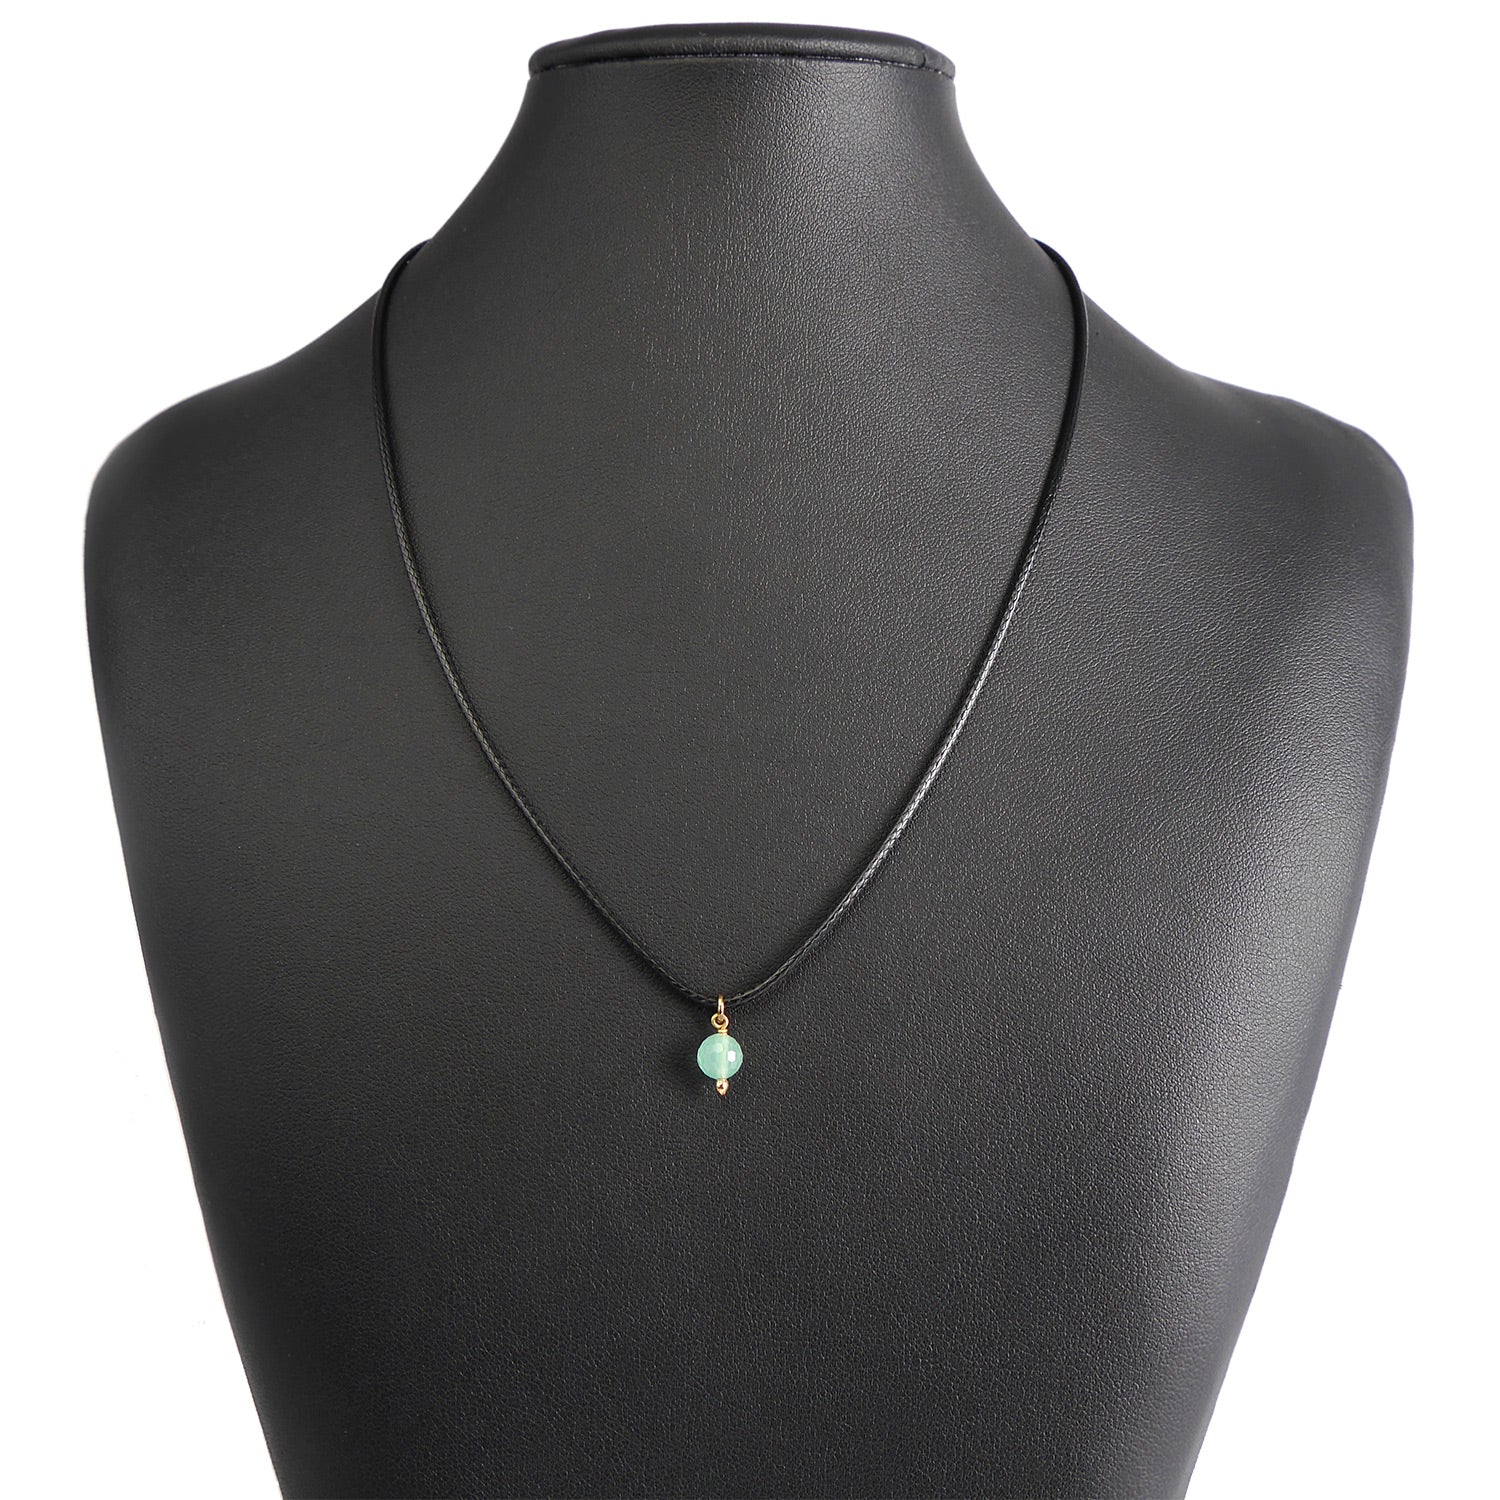 Faux Leather Necklace with Turquoise Crystal